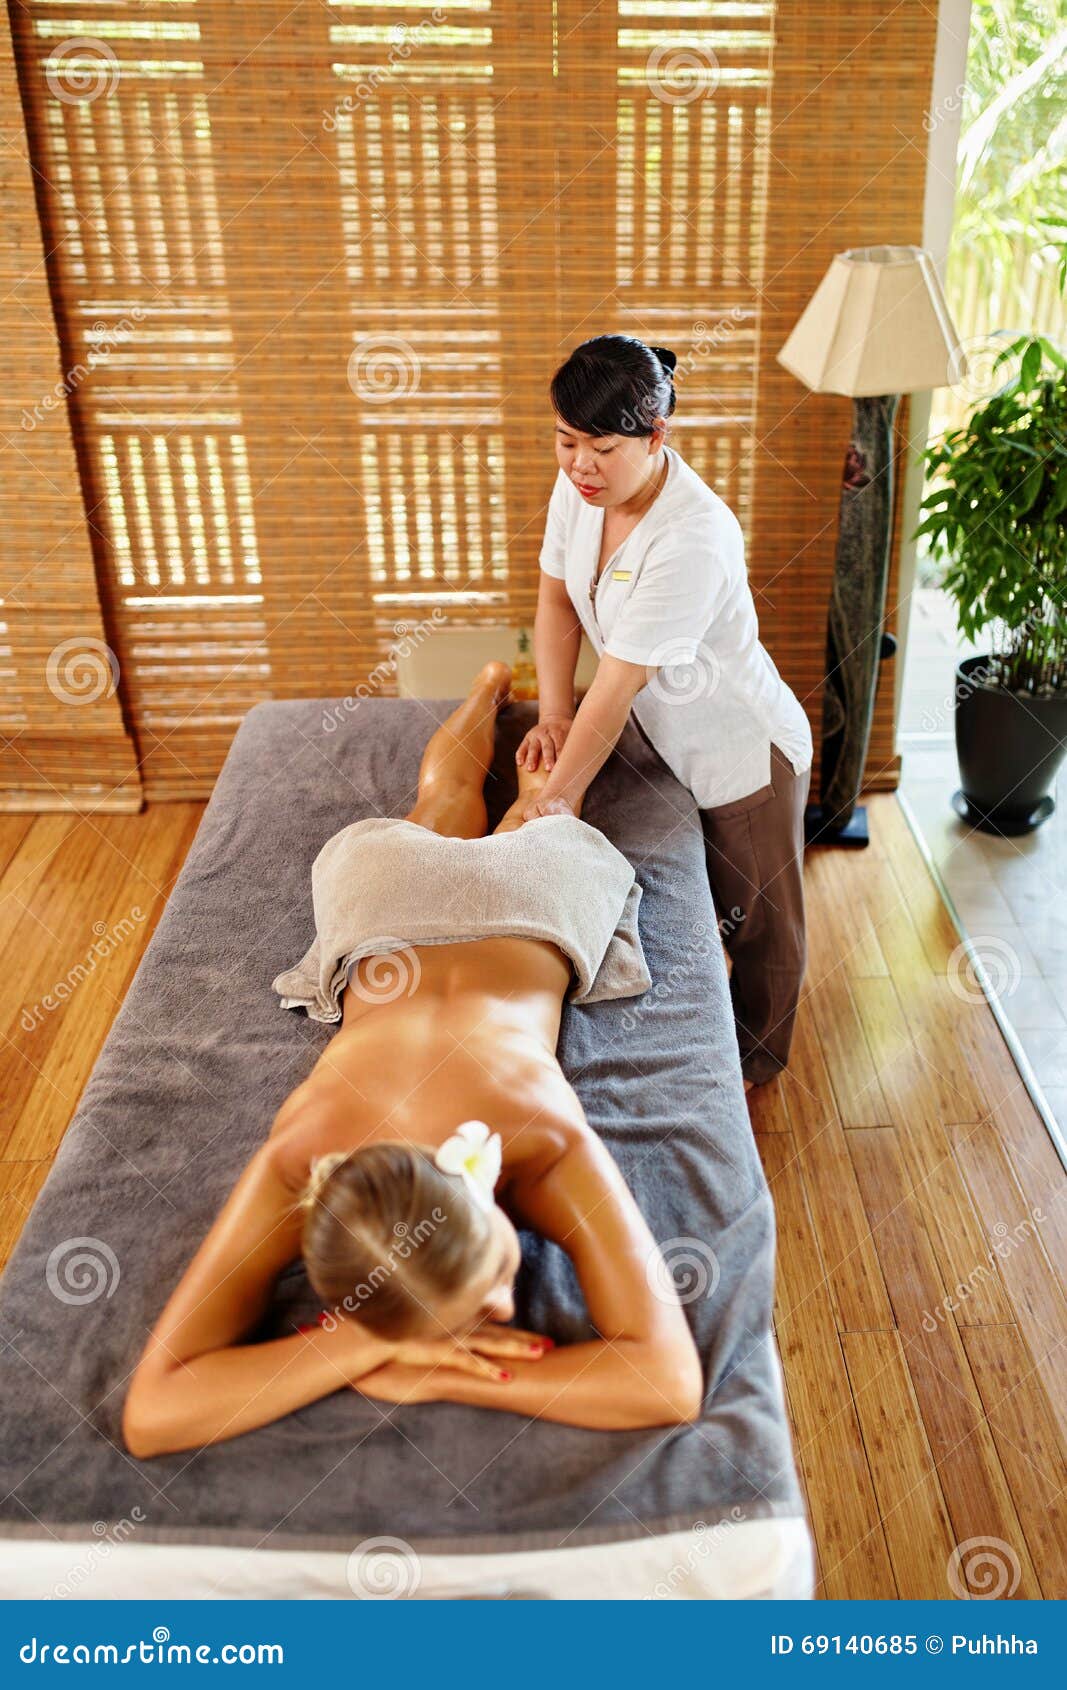 Solrig Interesse håndled Spa Woman. Oil Leg Massage Therapy, Treatment. Body Skin Care Stock Image -  Image of legs, beauty: 69140685